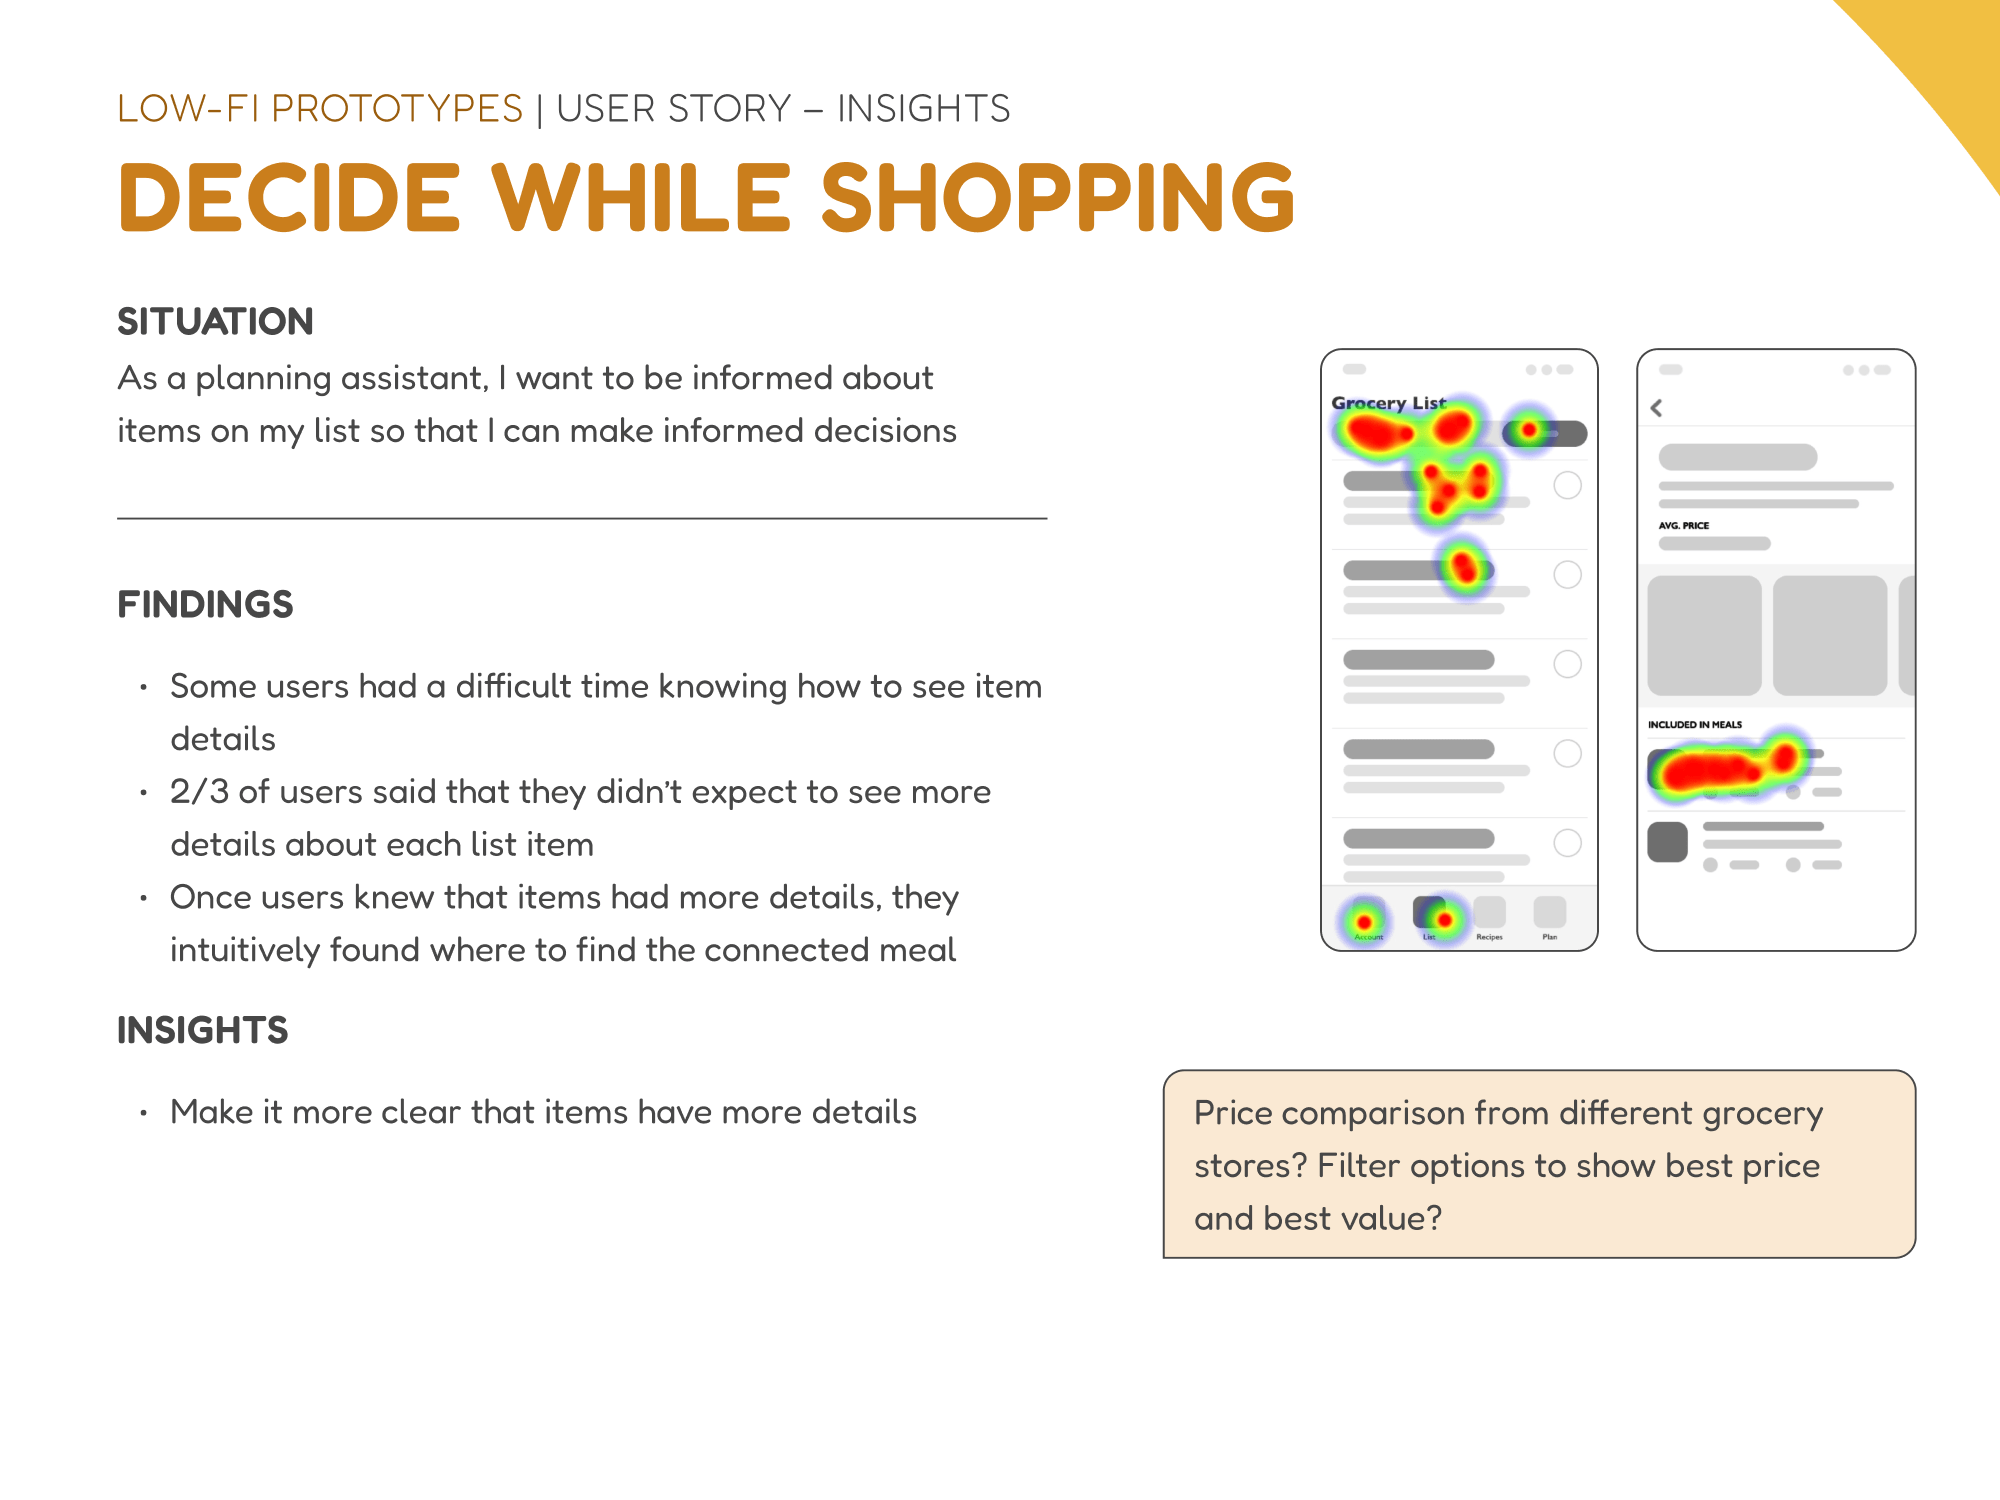 Insights for the planning assistant deciding while shopping. Some users had a difficult time knowing how to see more details about items on the list.